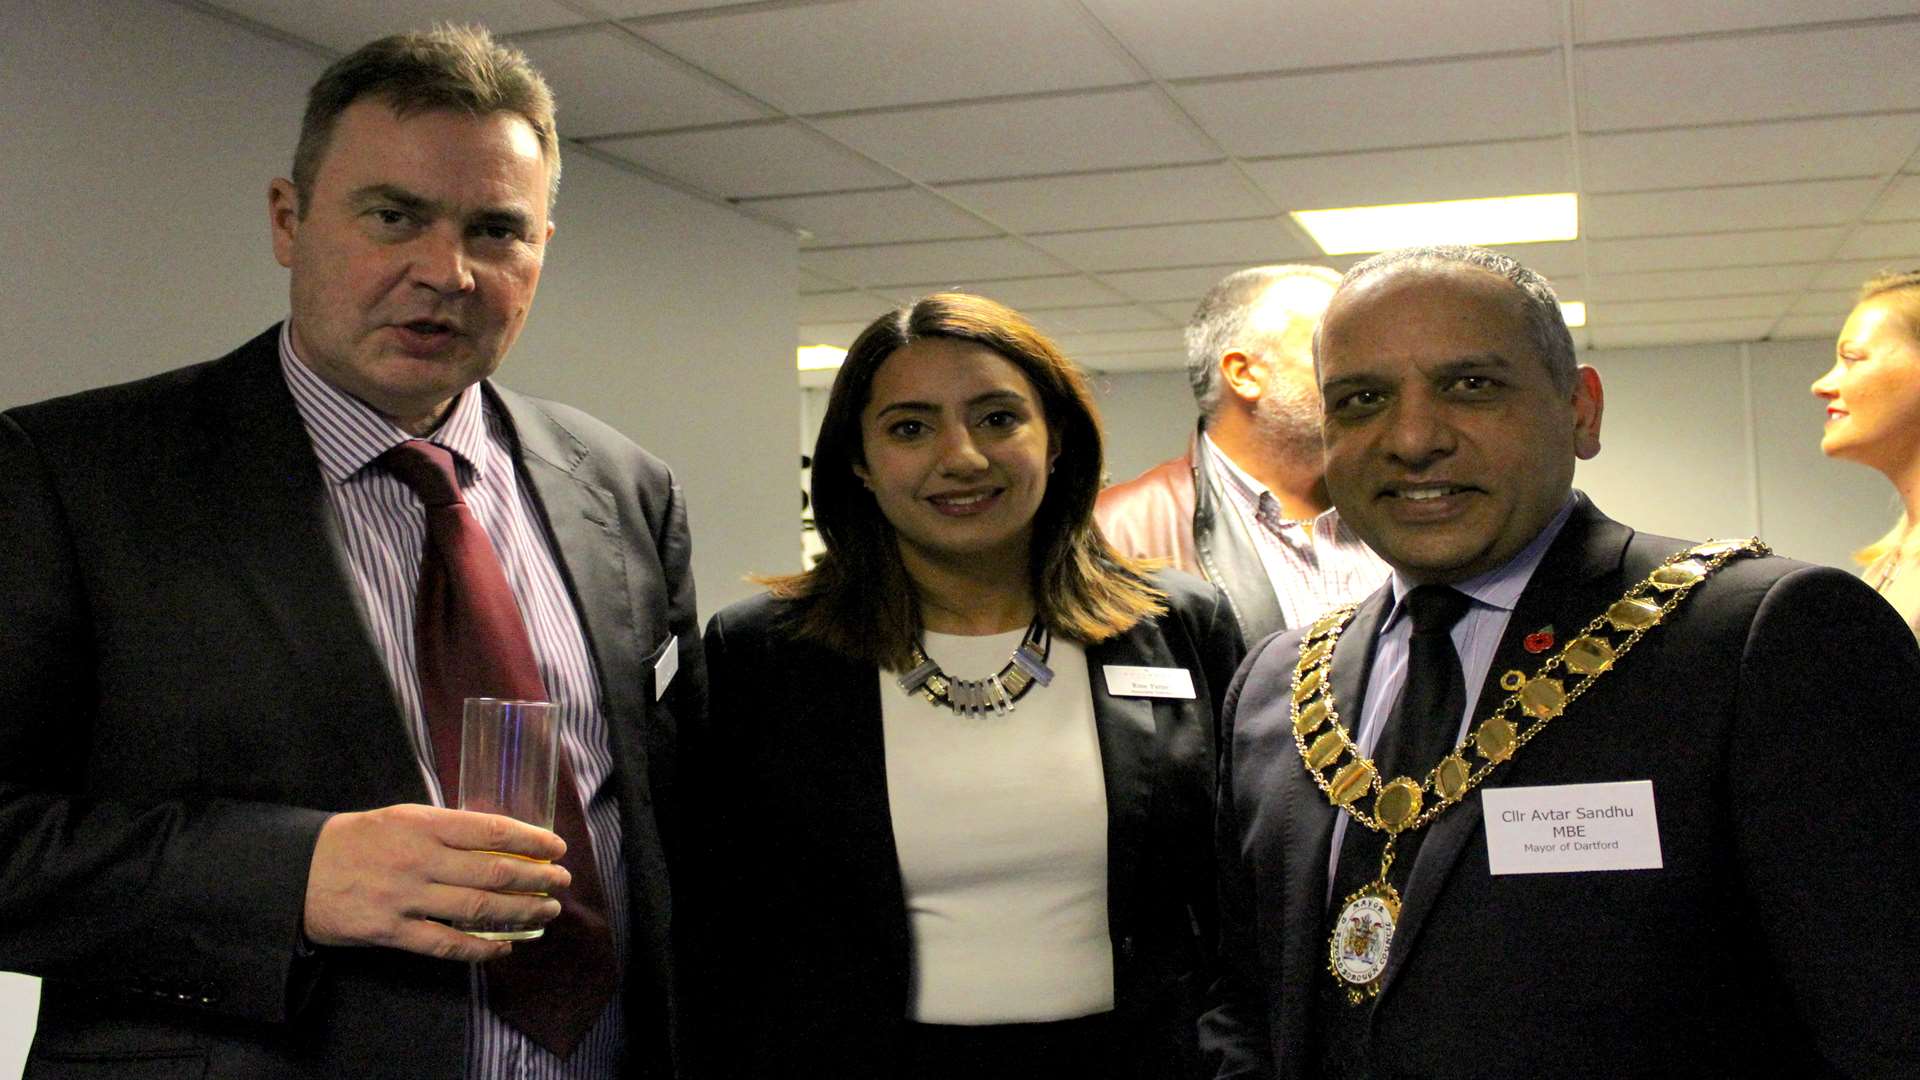 David Brown and Rina Pattar, two members of the Gullands Gravesend team, with the Mayor of Dartford Cllr Avtar Sandhu